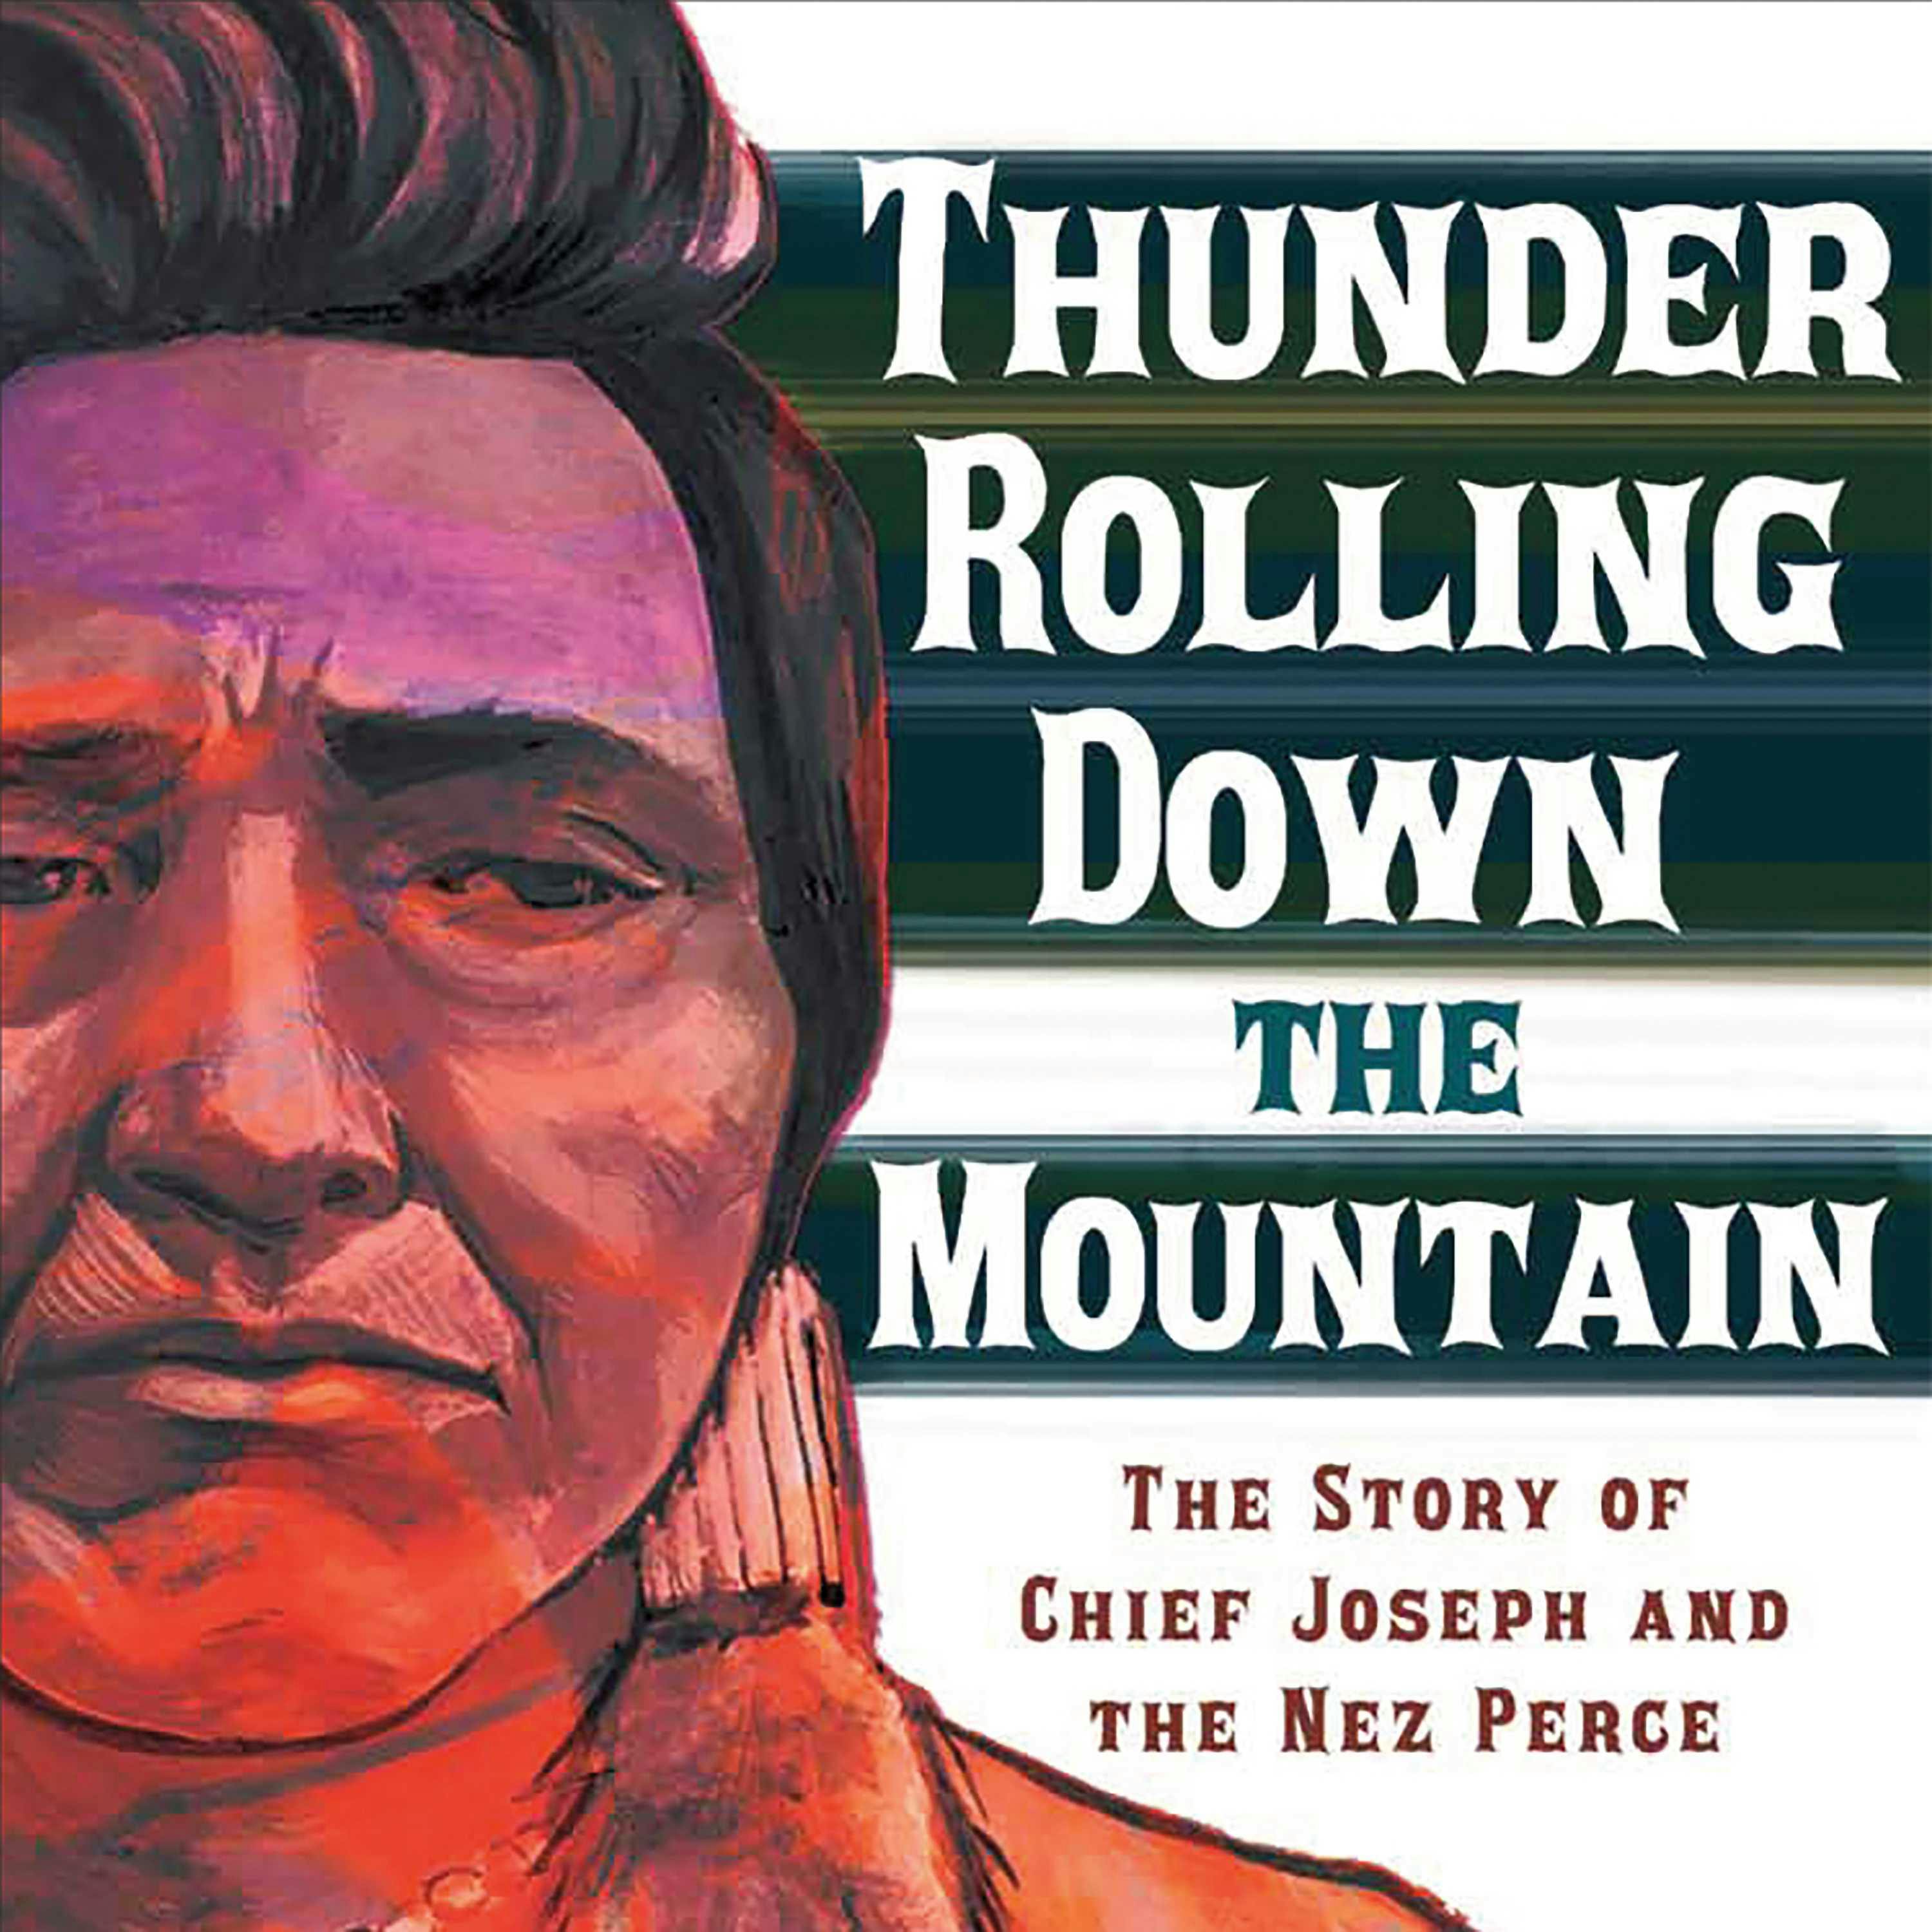 Thunder Rolling Down the Mountain: The Story of Chief Joseph and the Nez Perce - Agnieszka Biskup